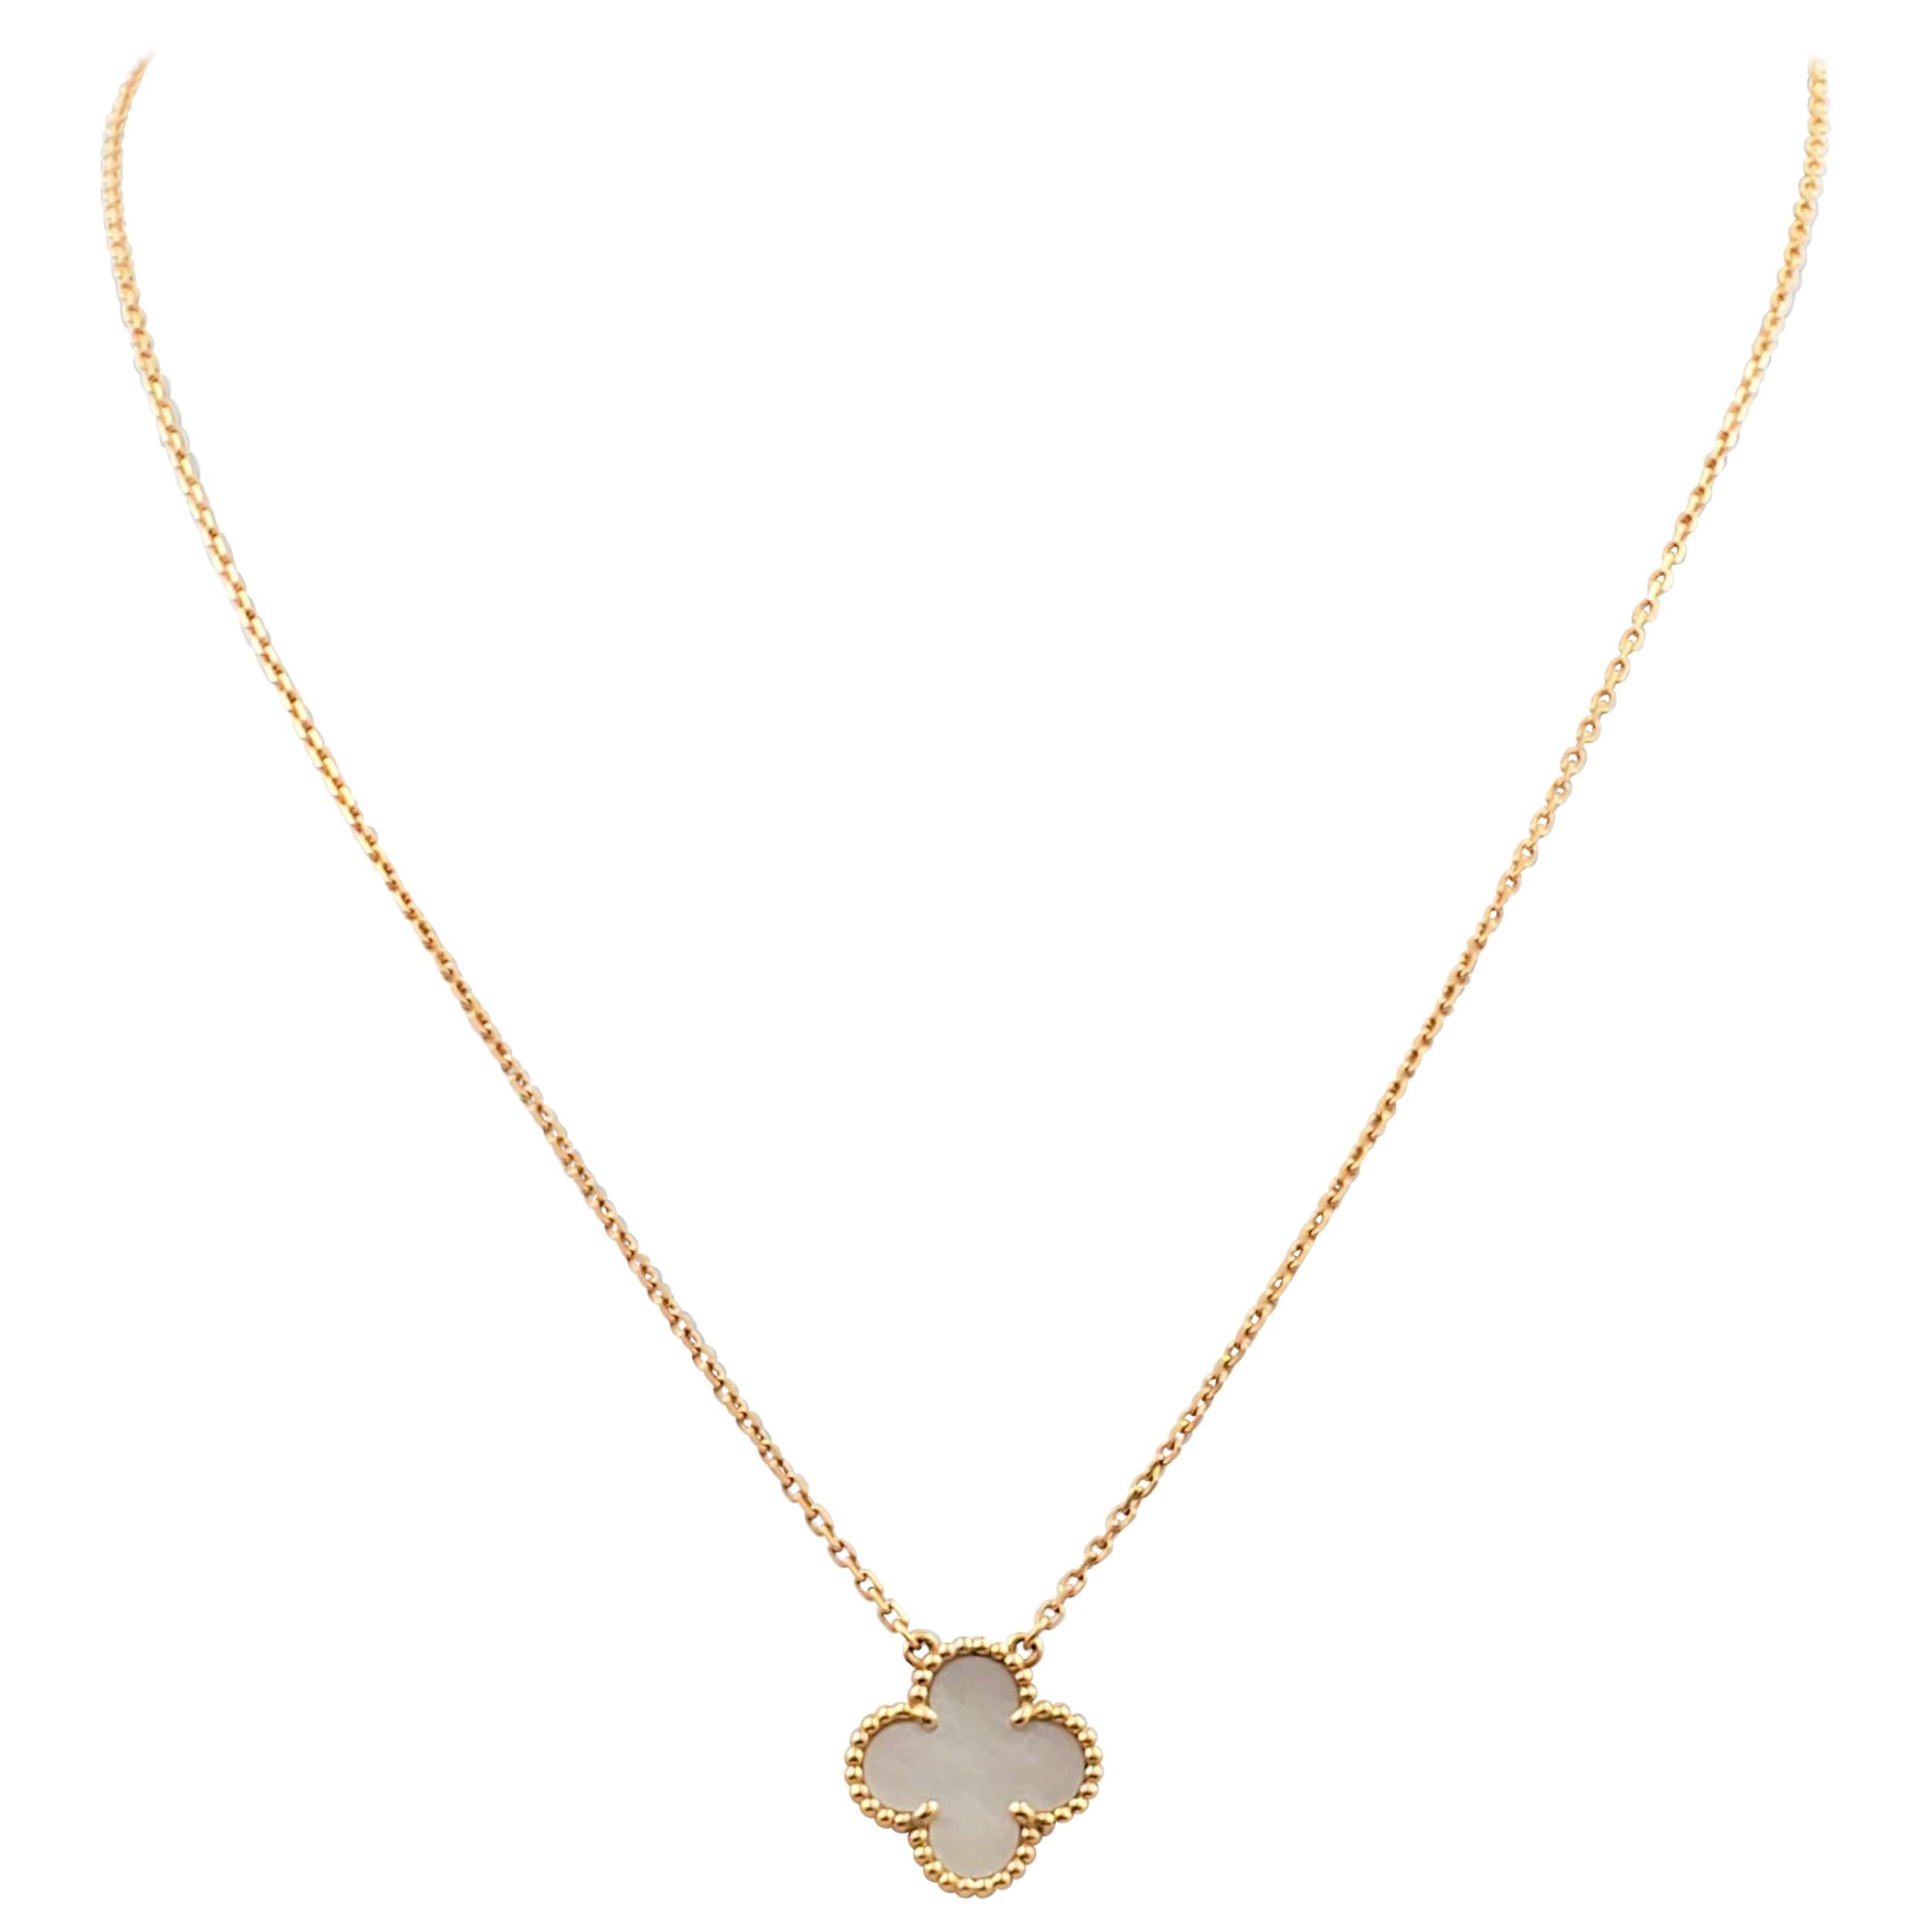 Van Cleef & Arpels 'Vintage Alhambra' Yellow Gold and Mother of Pearl Necklace